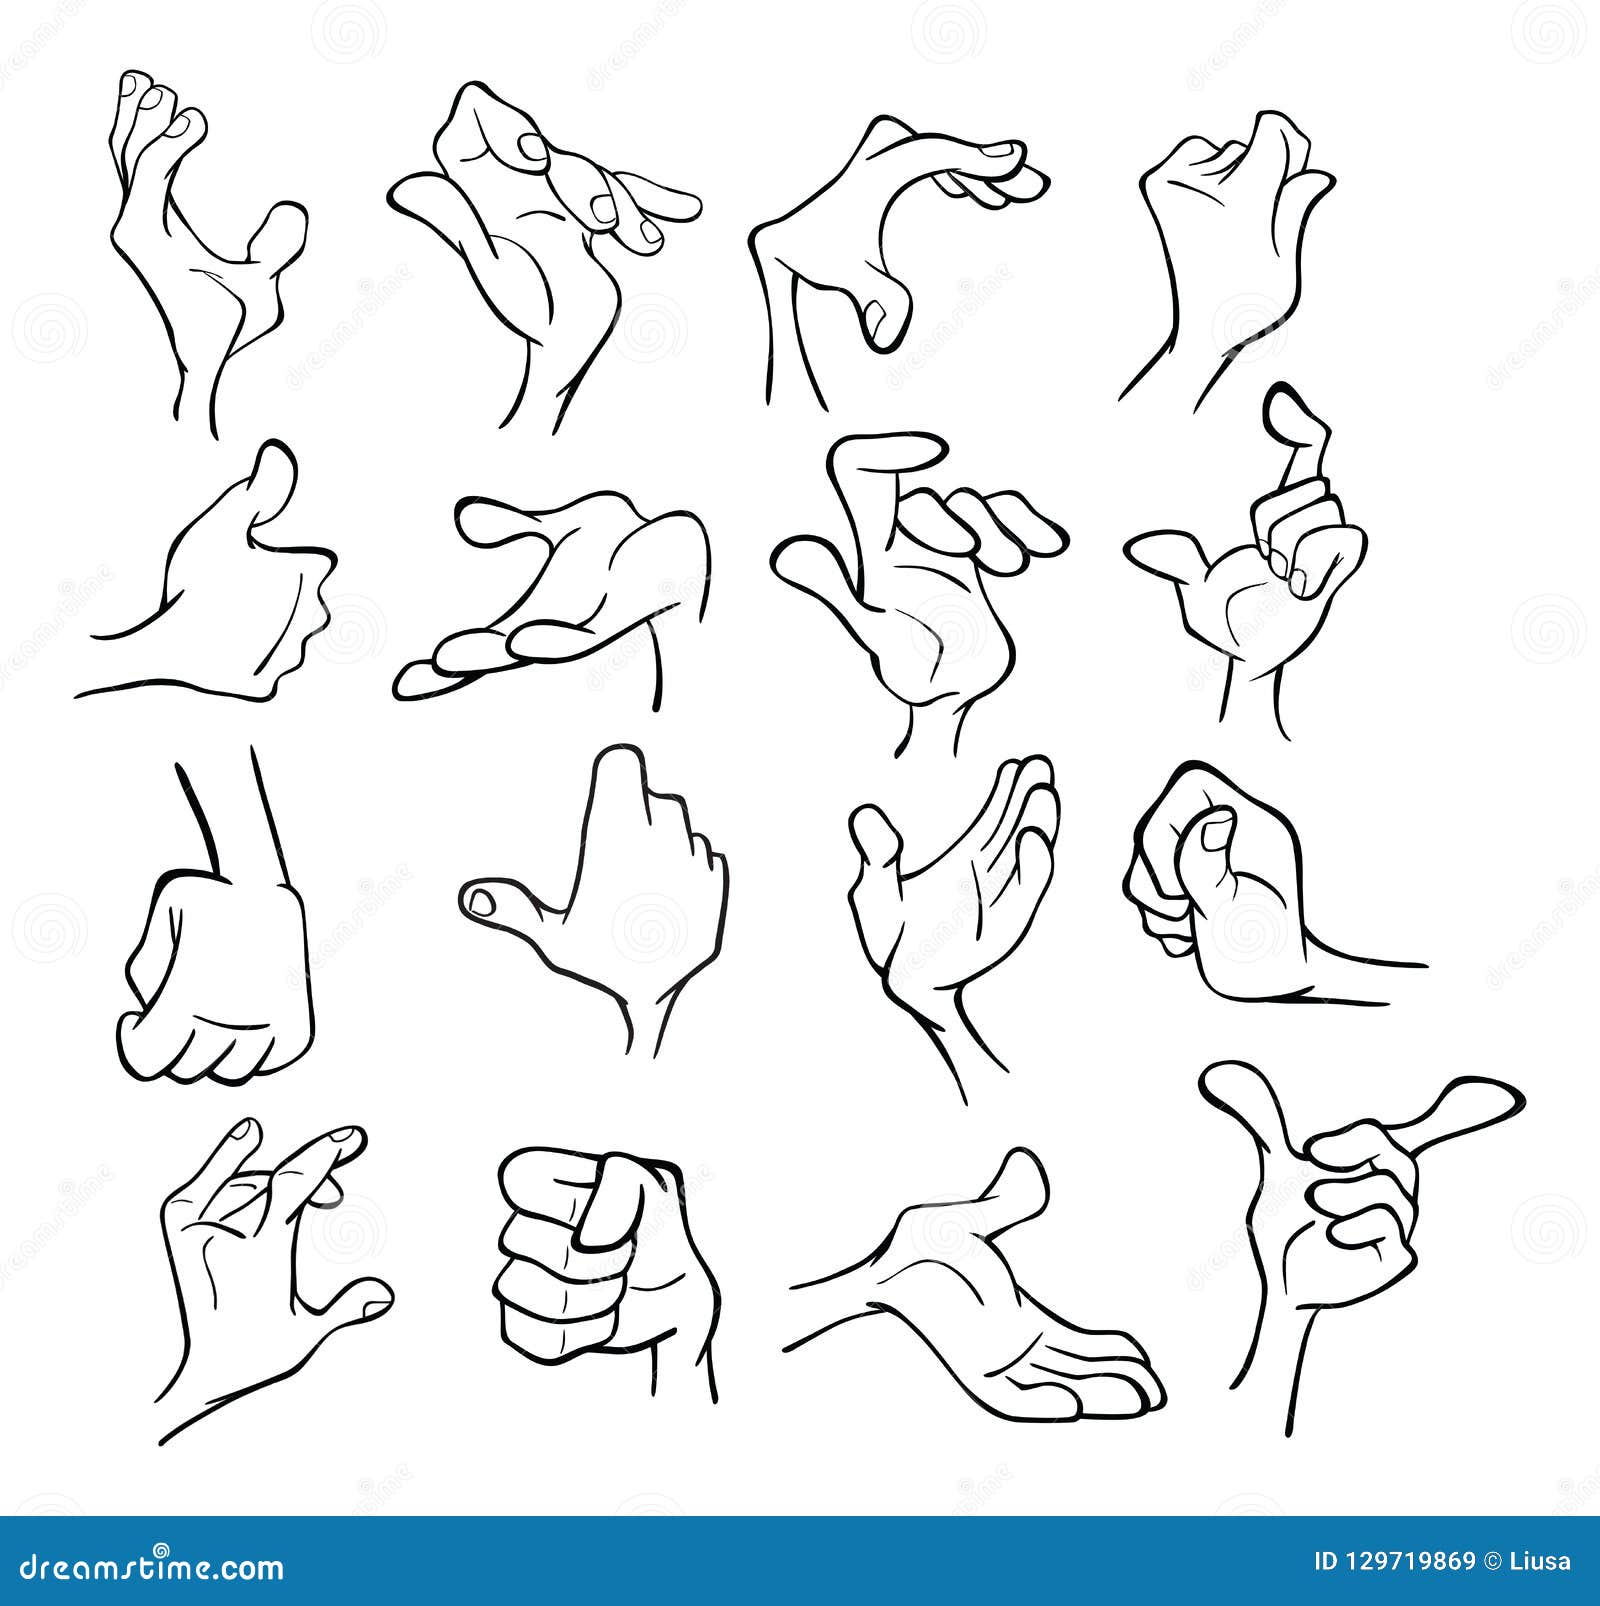 A Set of Cartoon Illustrations. Hands with Different Gestures for You  Design. Coloring Book. Outline Stock Vector - Illustration of help, sketch:  129719869